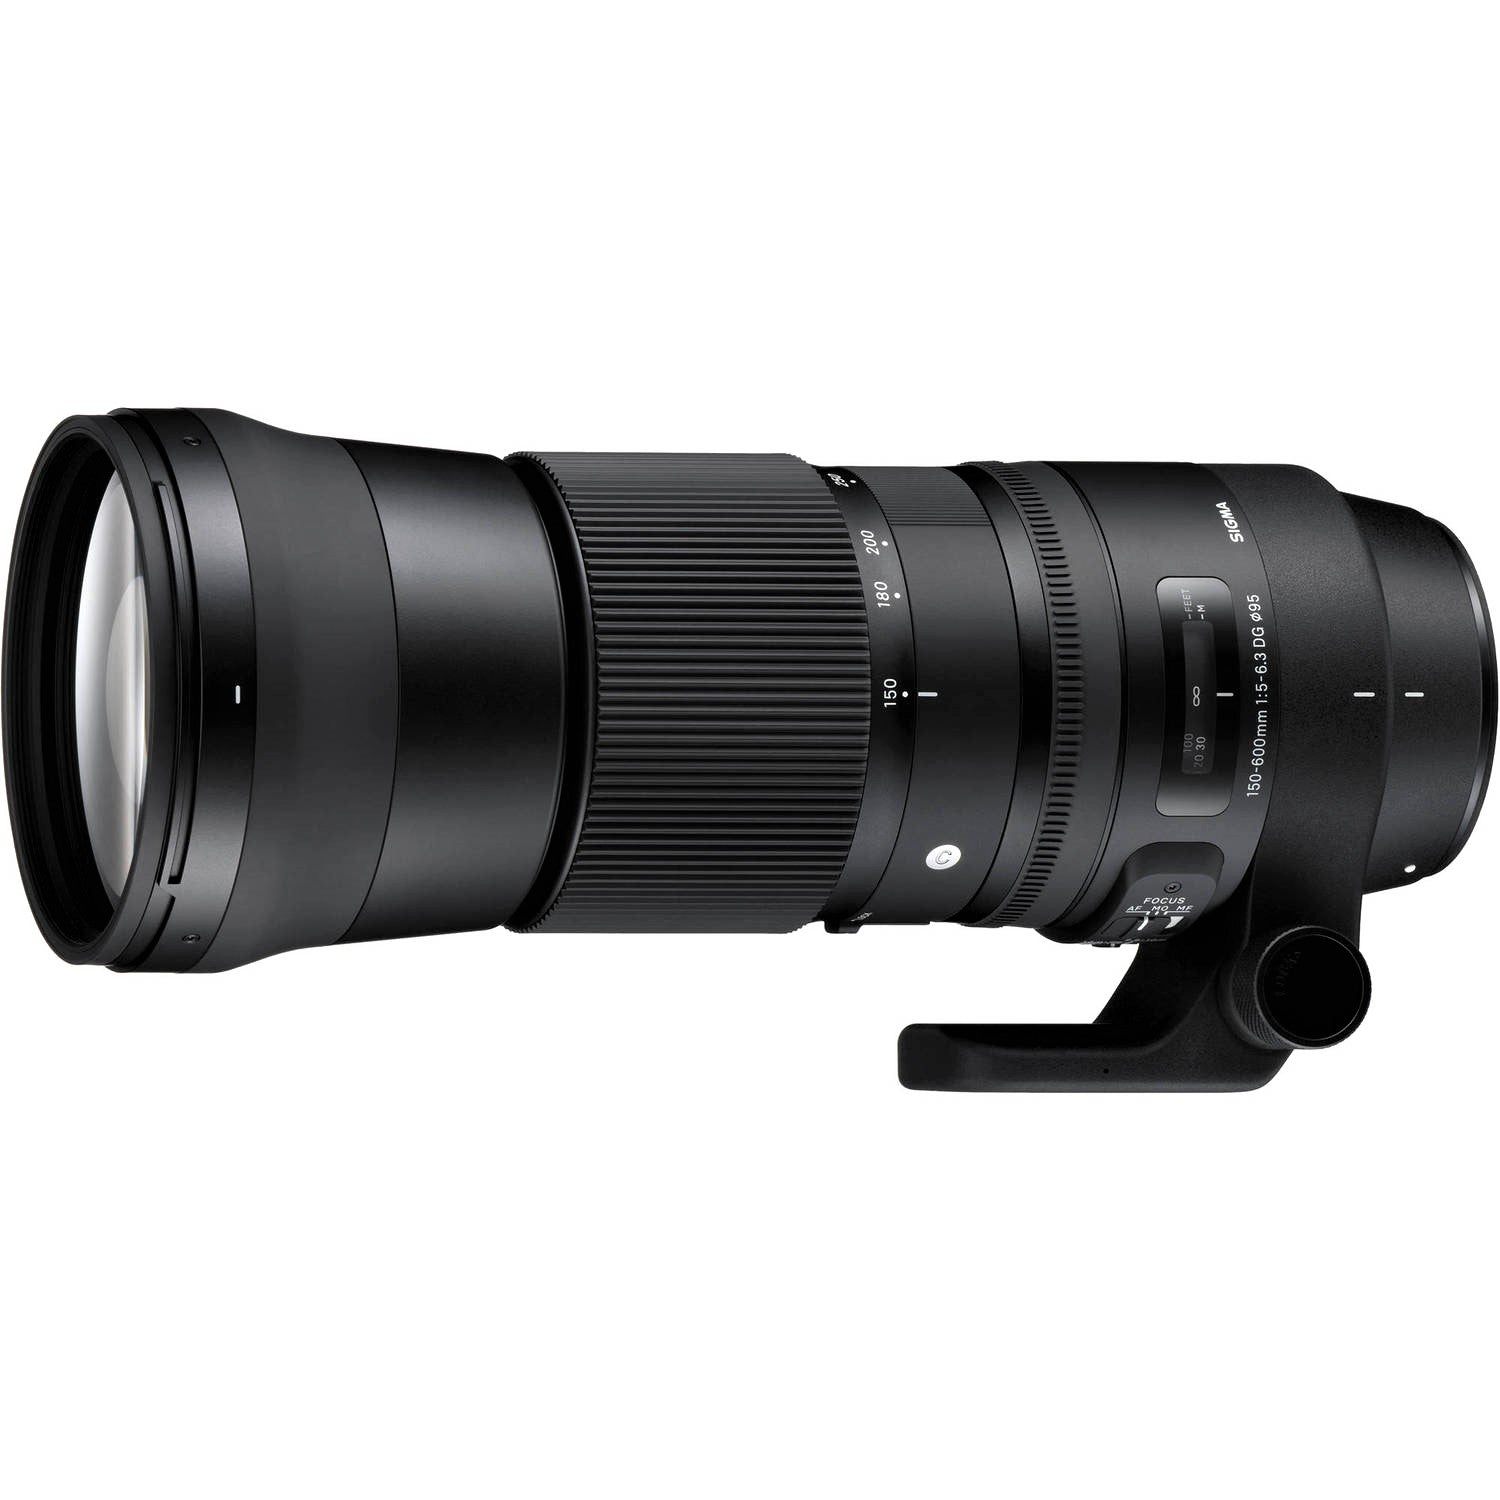 Sigma 150-600mm F5-6.3 DG OS HSM Contemporary Lens for Canon EF with Attached Lens Hood on the Left